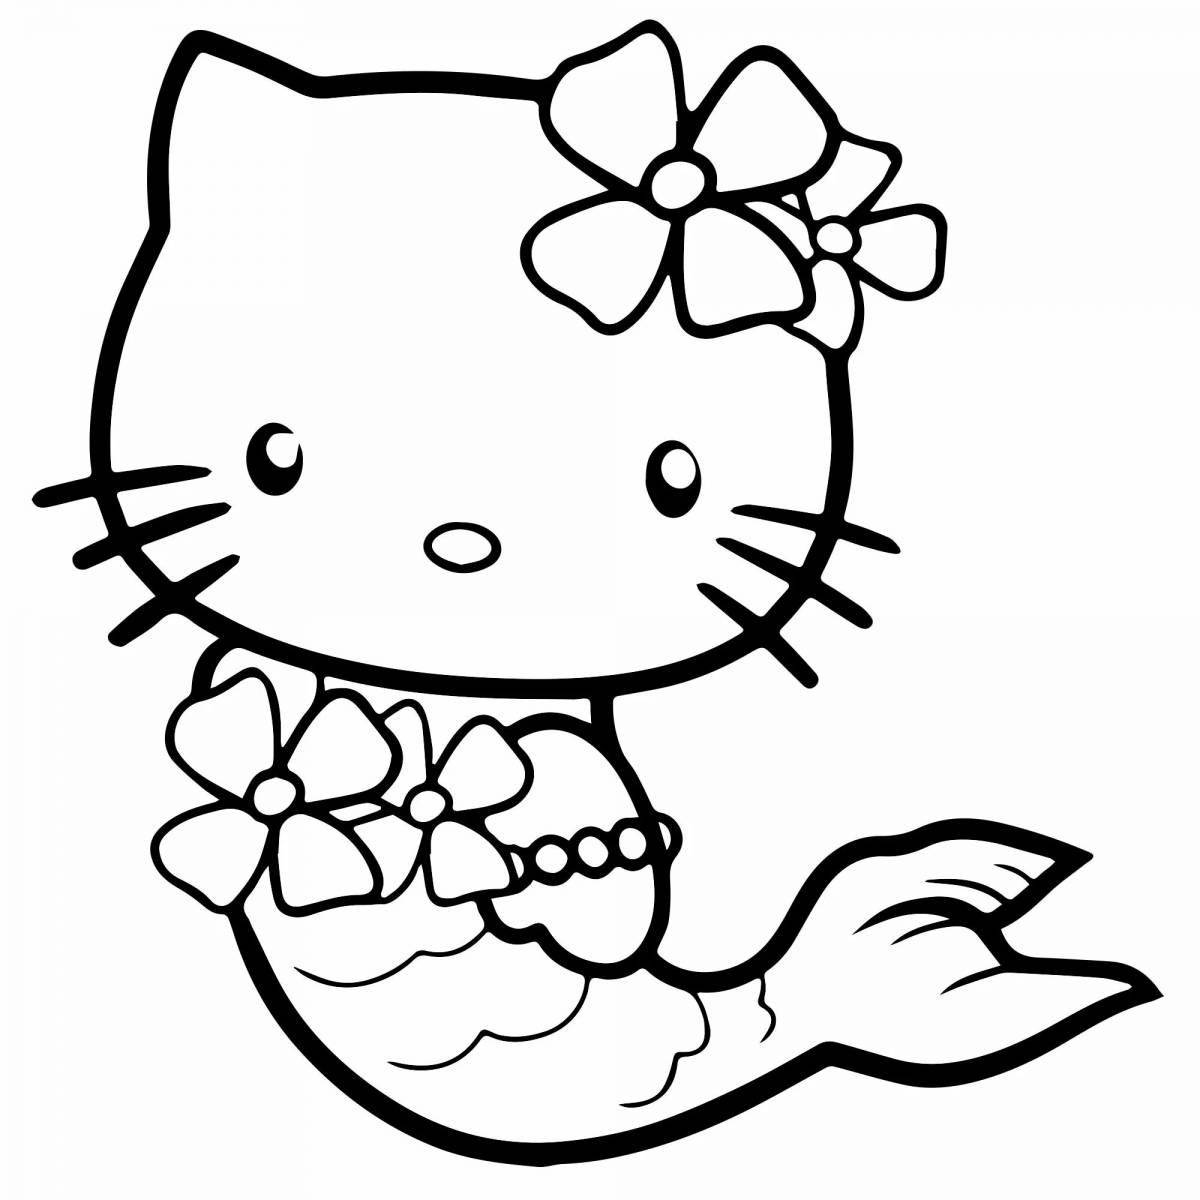 Adorable kisi misi coloring book for kids